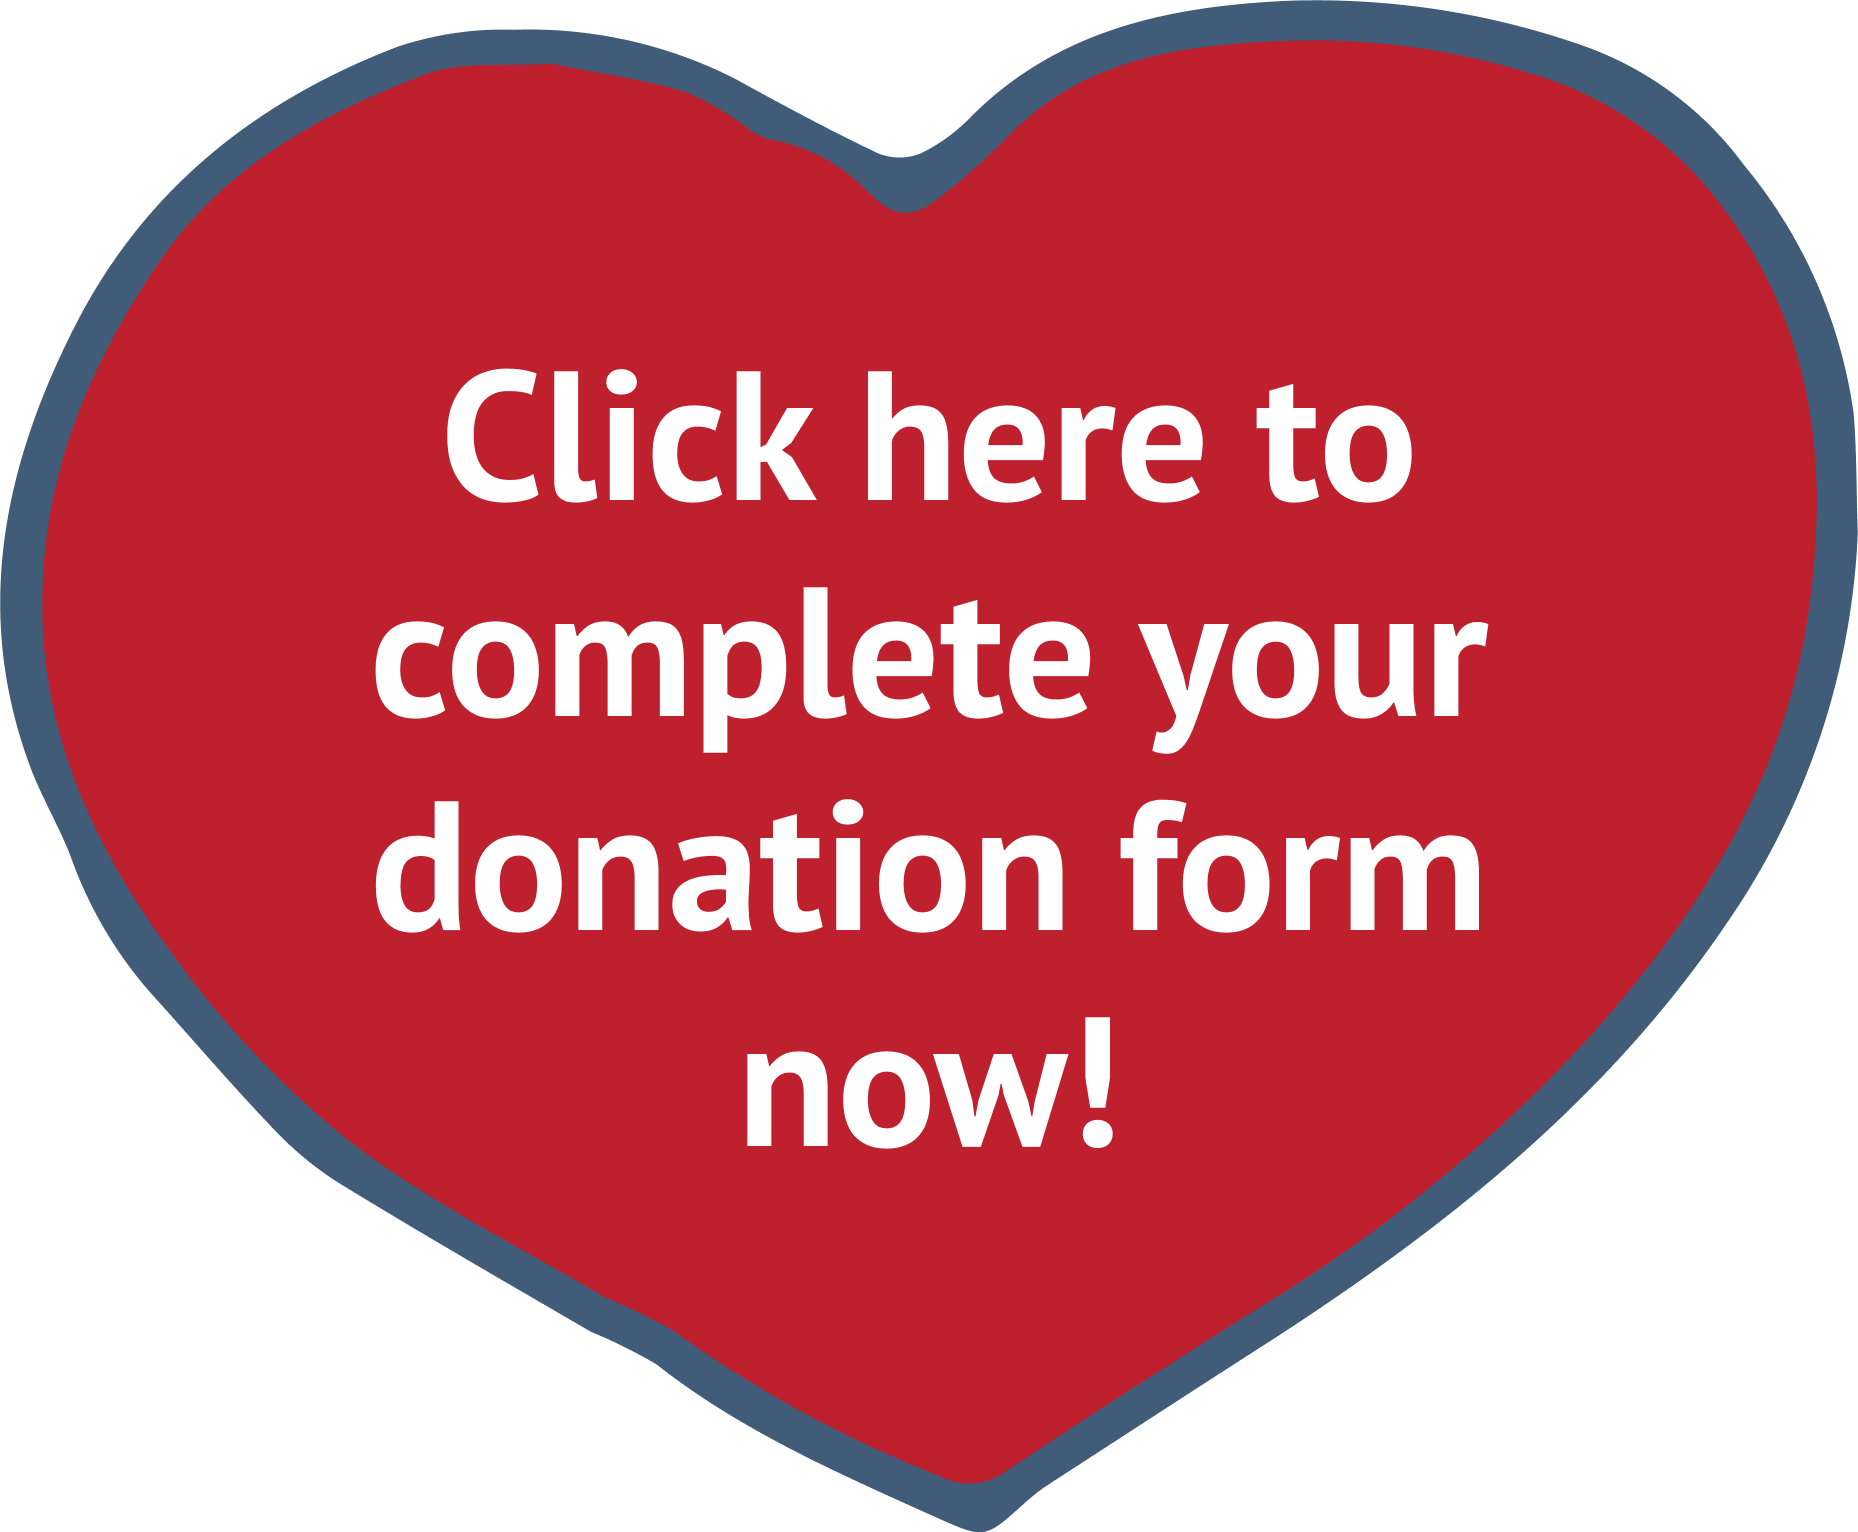 Click here to complete your donation form now!